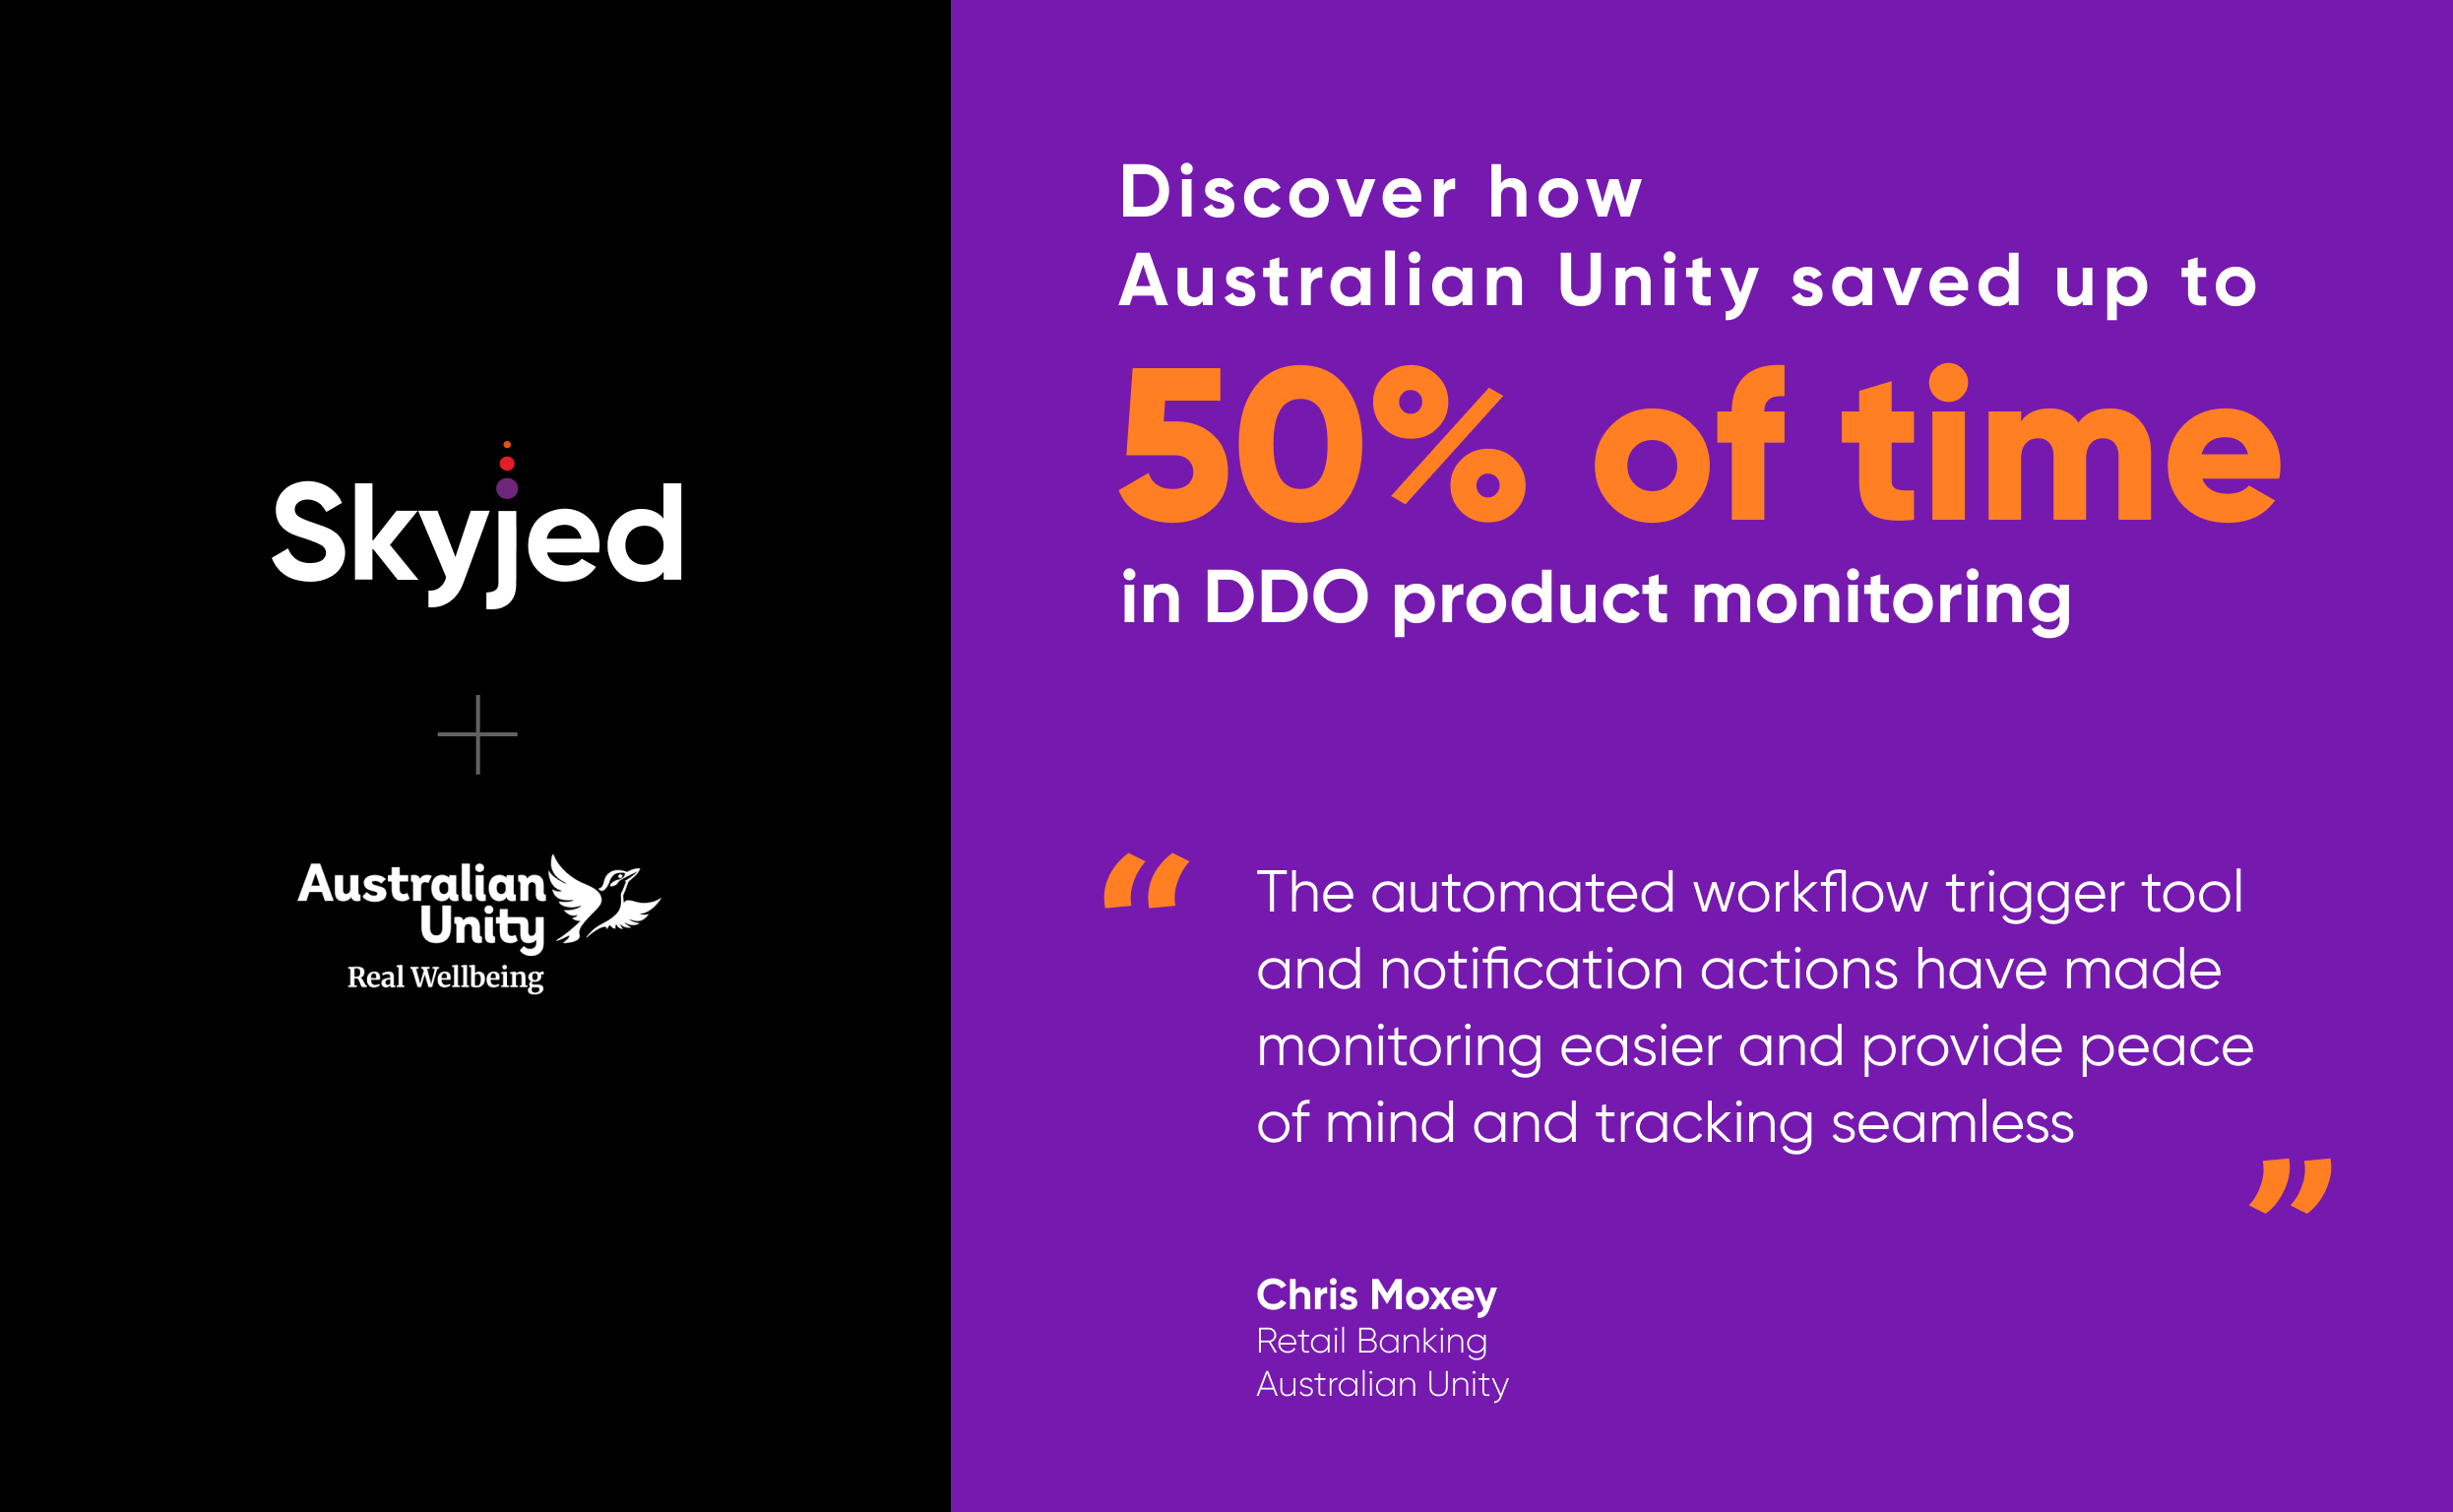 How Australian Unity saved time and streamlined Product Governance for DDO Management